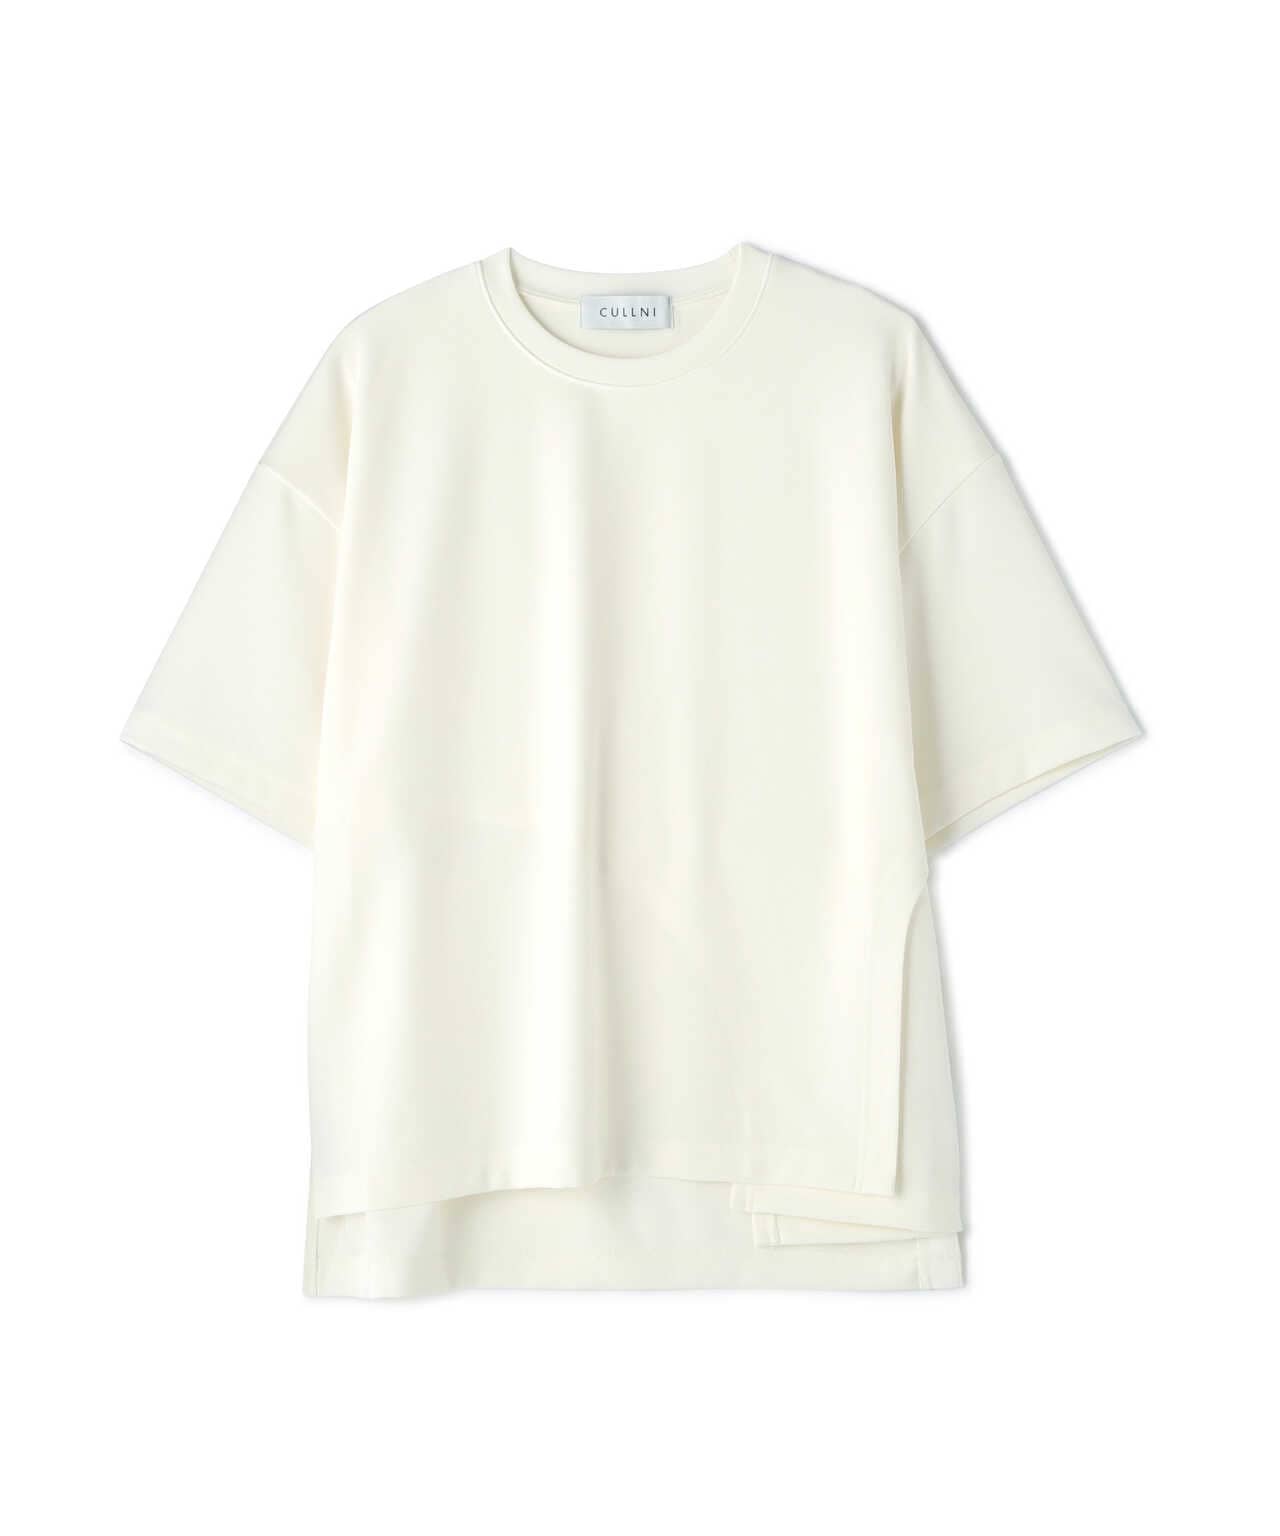 CULLNI/クルニ/Rounded-cutting Layered Georgette Tee/ラウンド